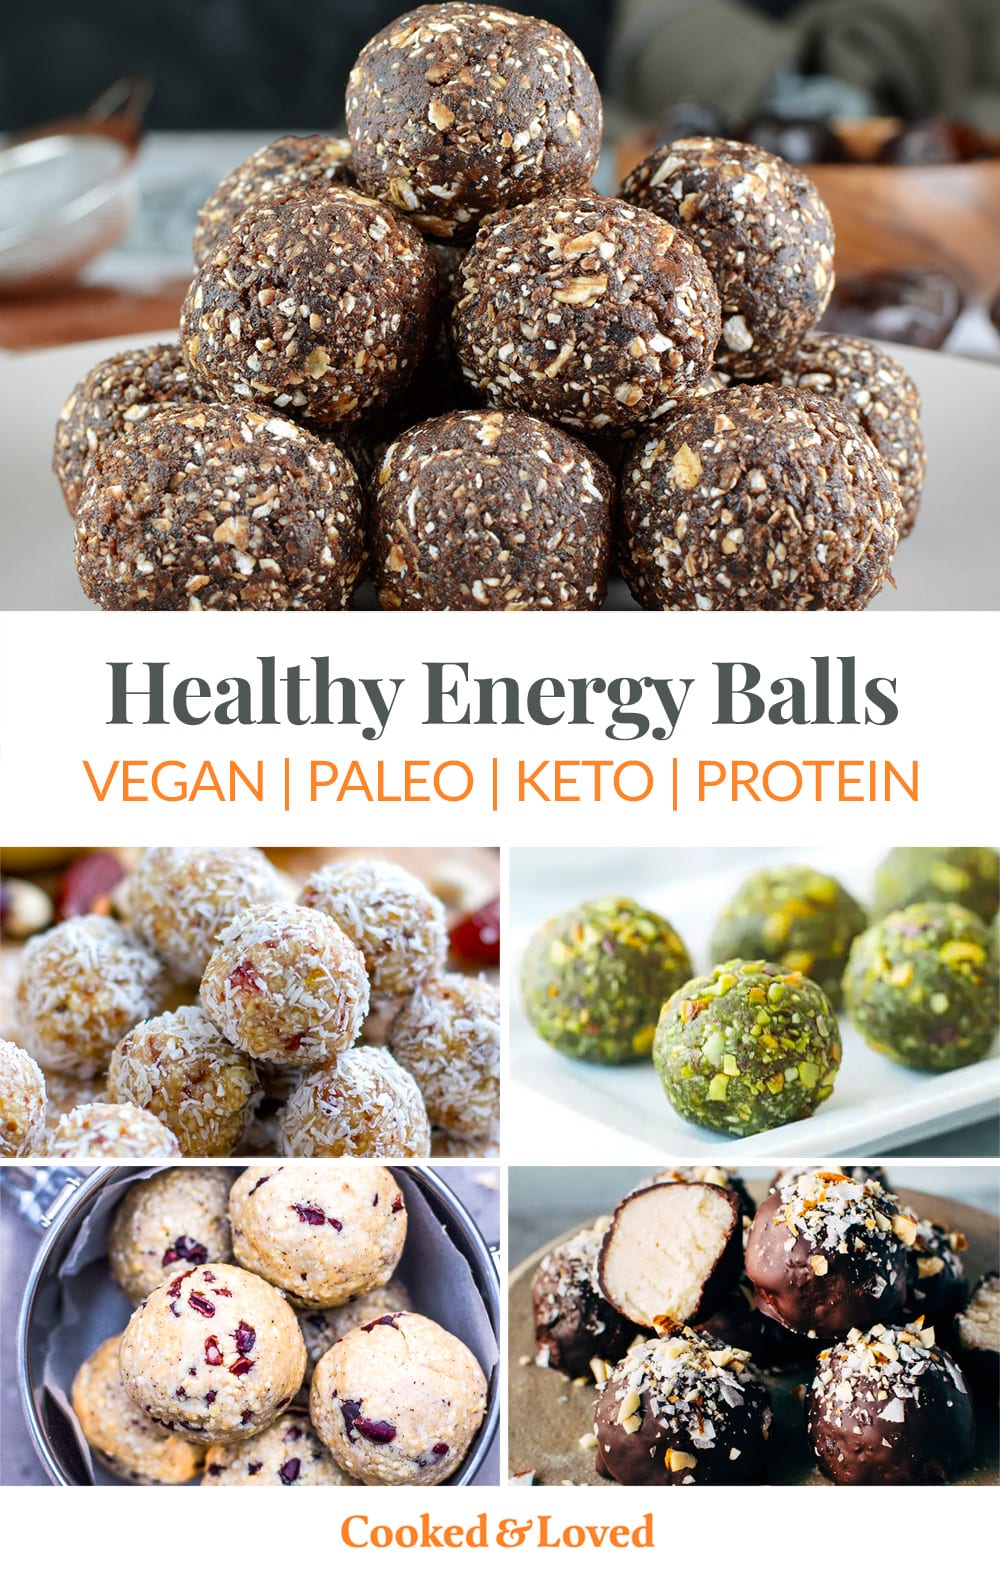 15 Paleo Bliss Balls For Extra Energy & Protein